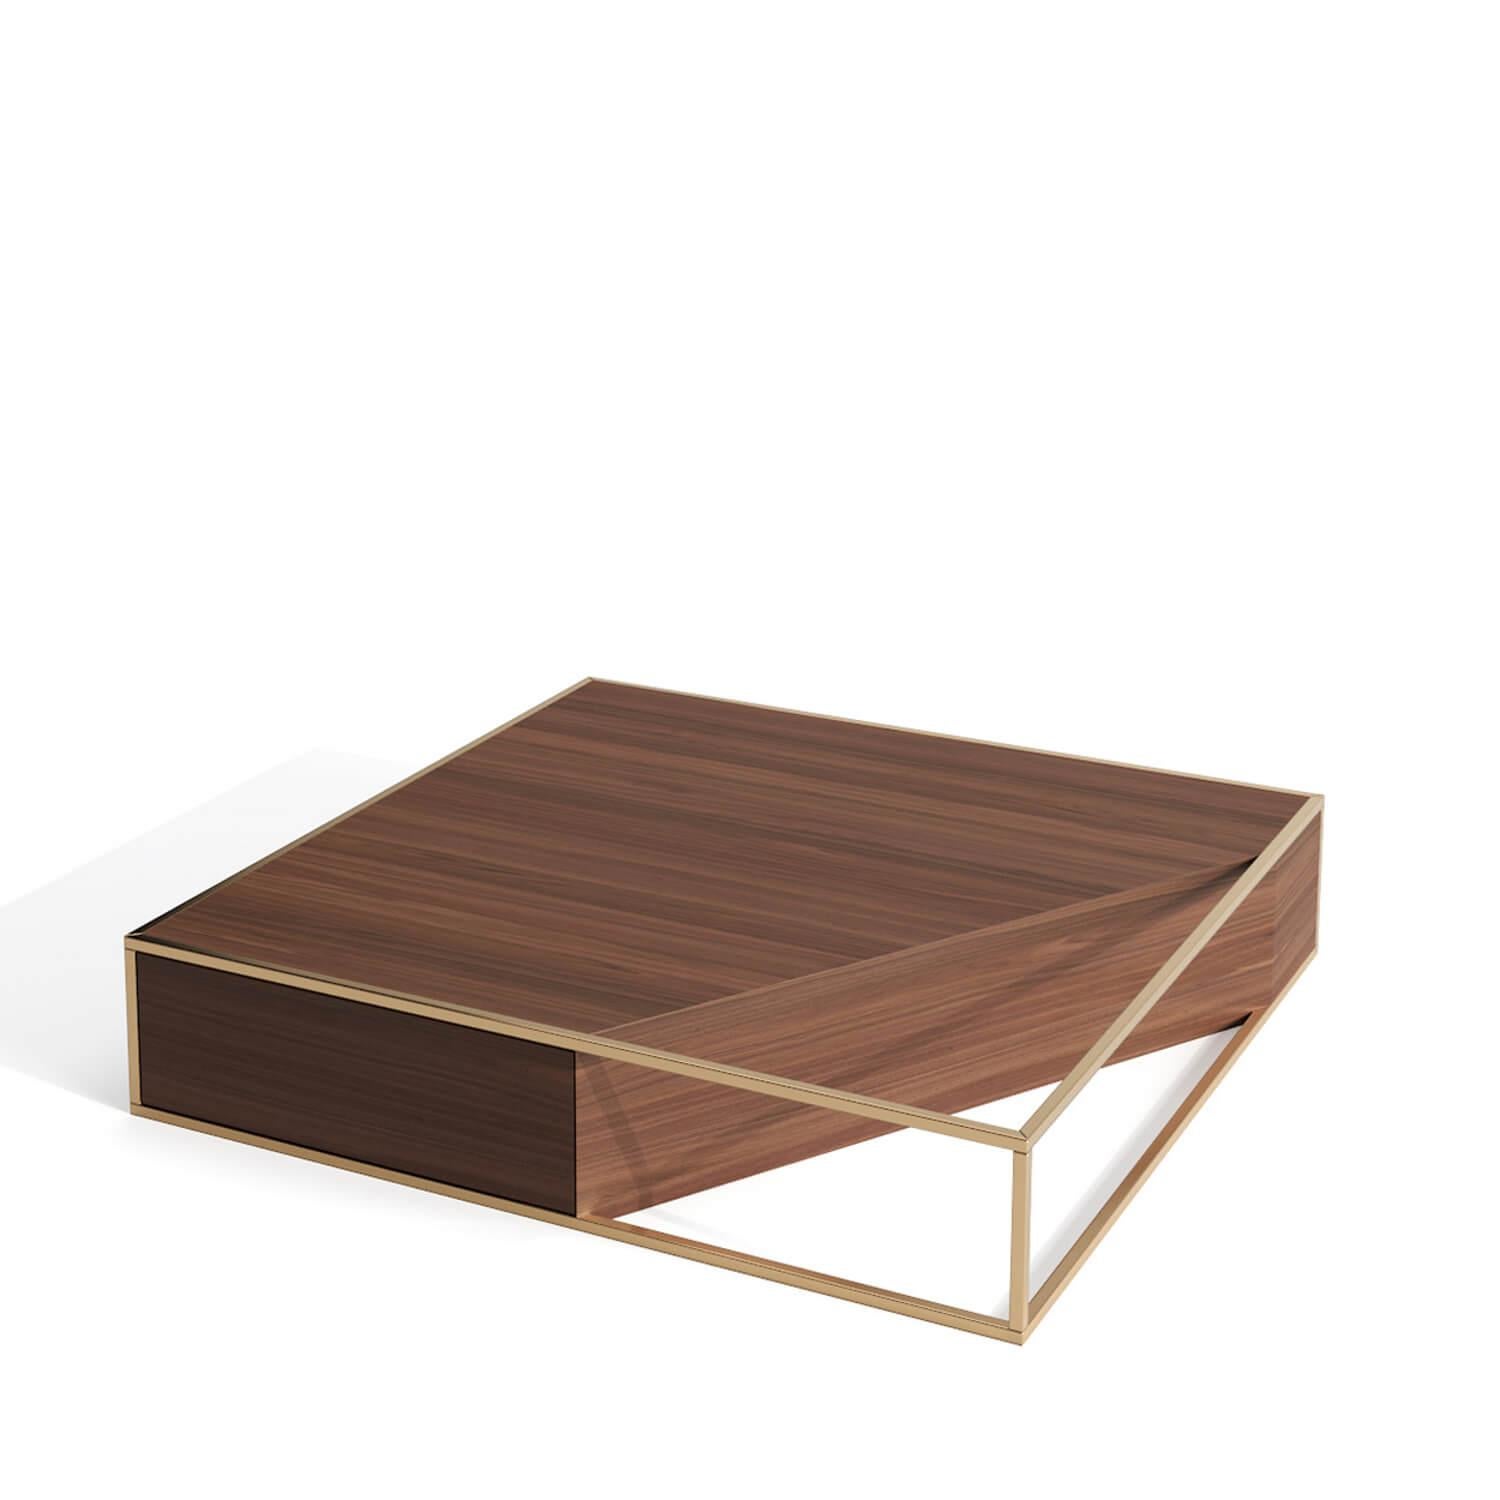 Portuguese Modern Minimalist Square Center Coffee Table in Walnut Wood and Brushed Brass For Sale